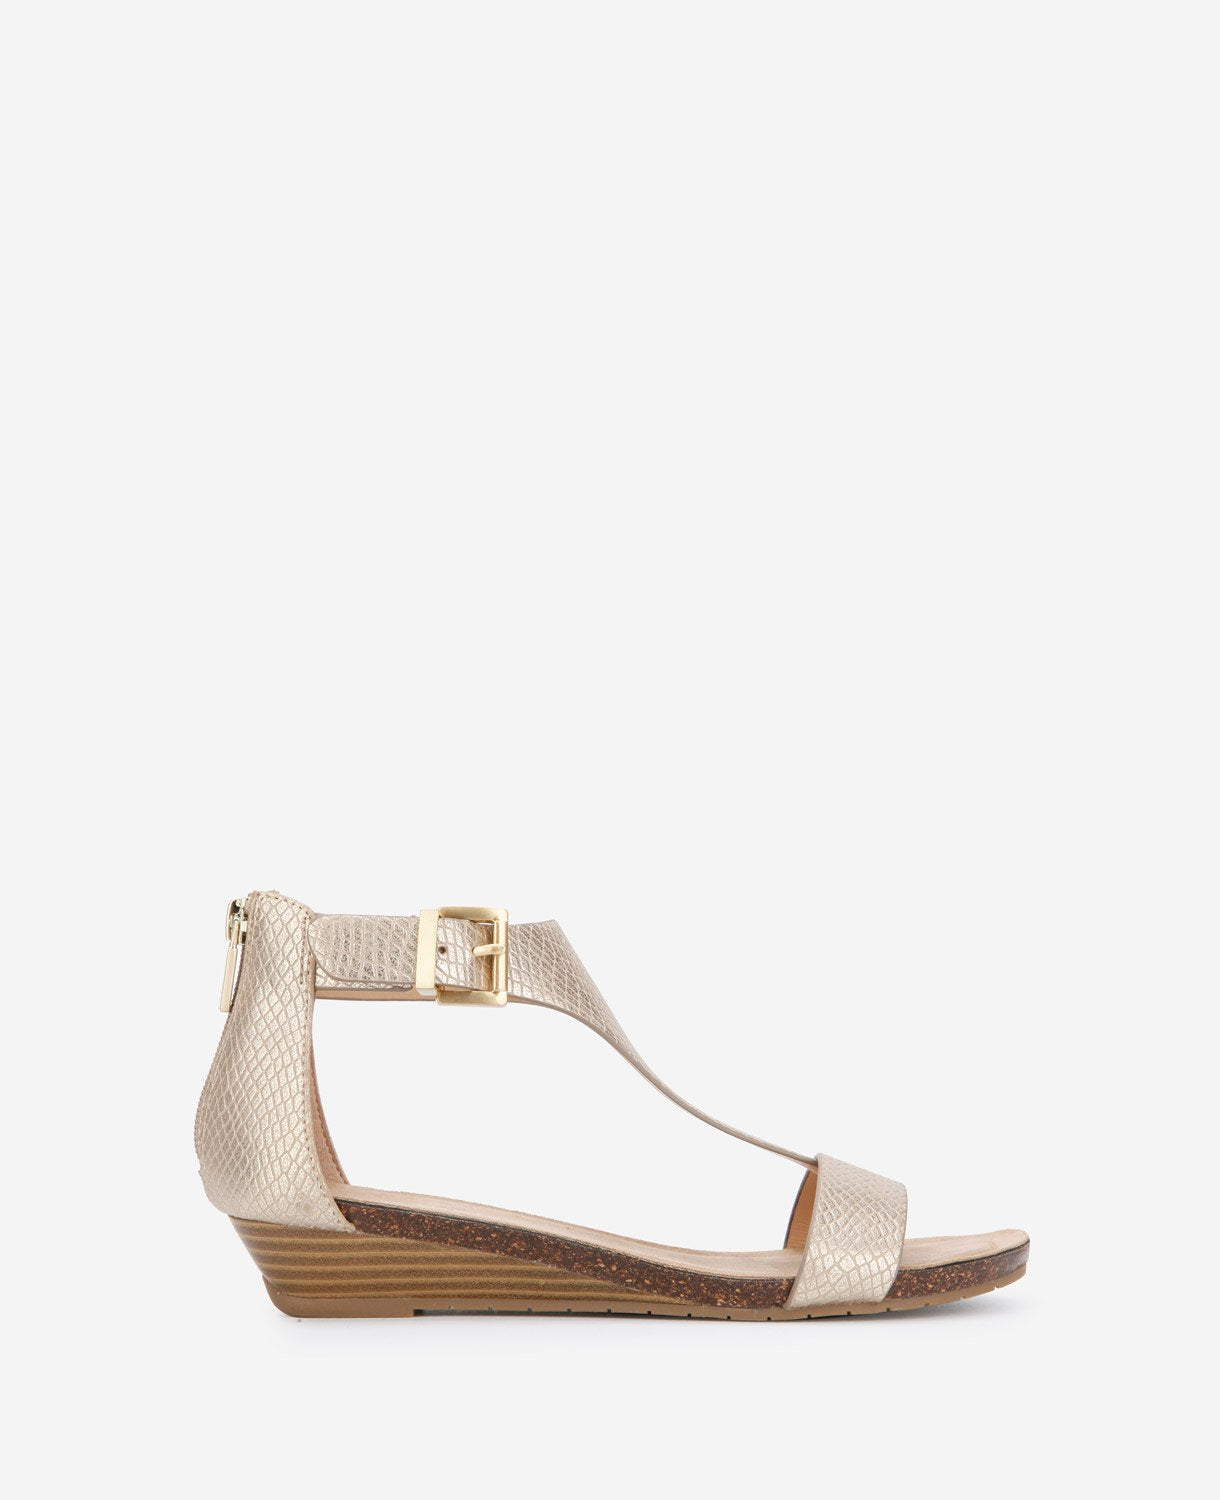 REACTION KENNETH COLE GREAT GAL ANKLE STRAP SANDAL